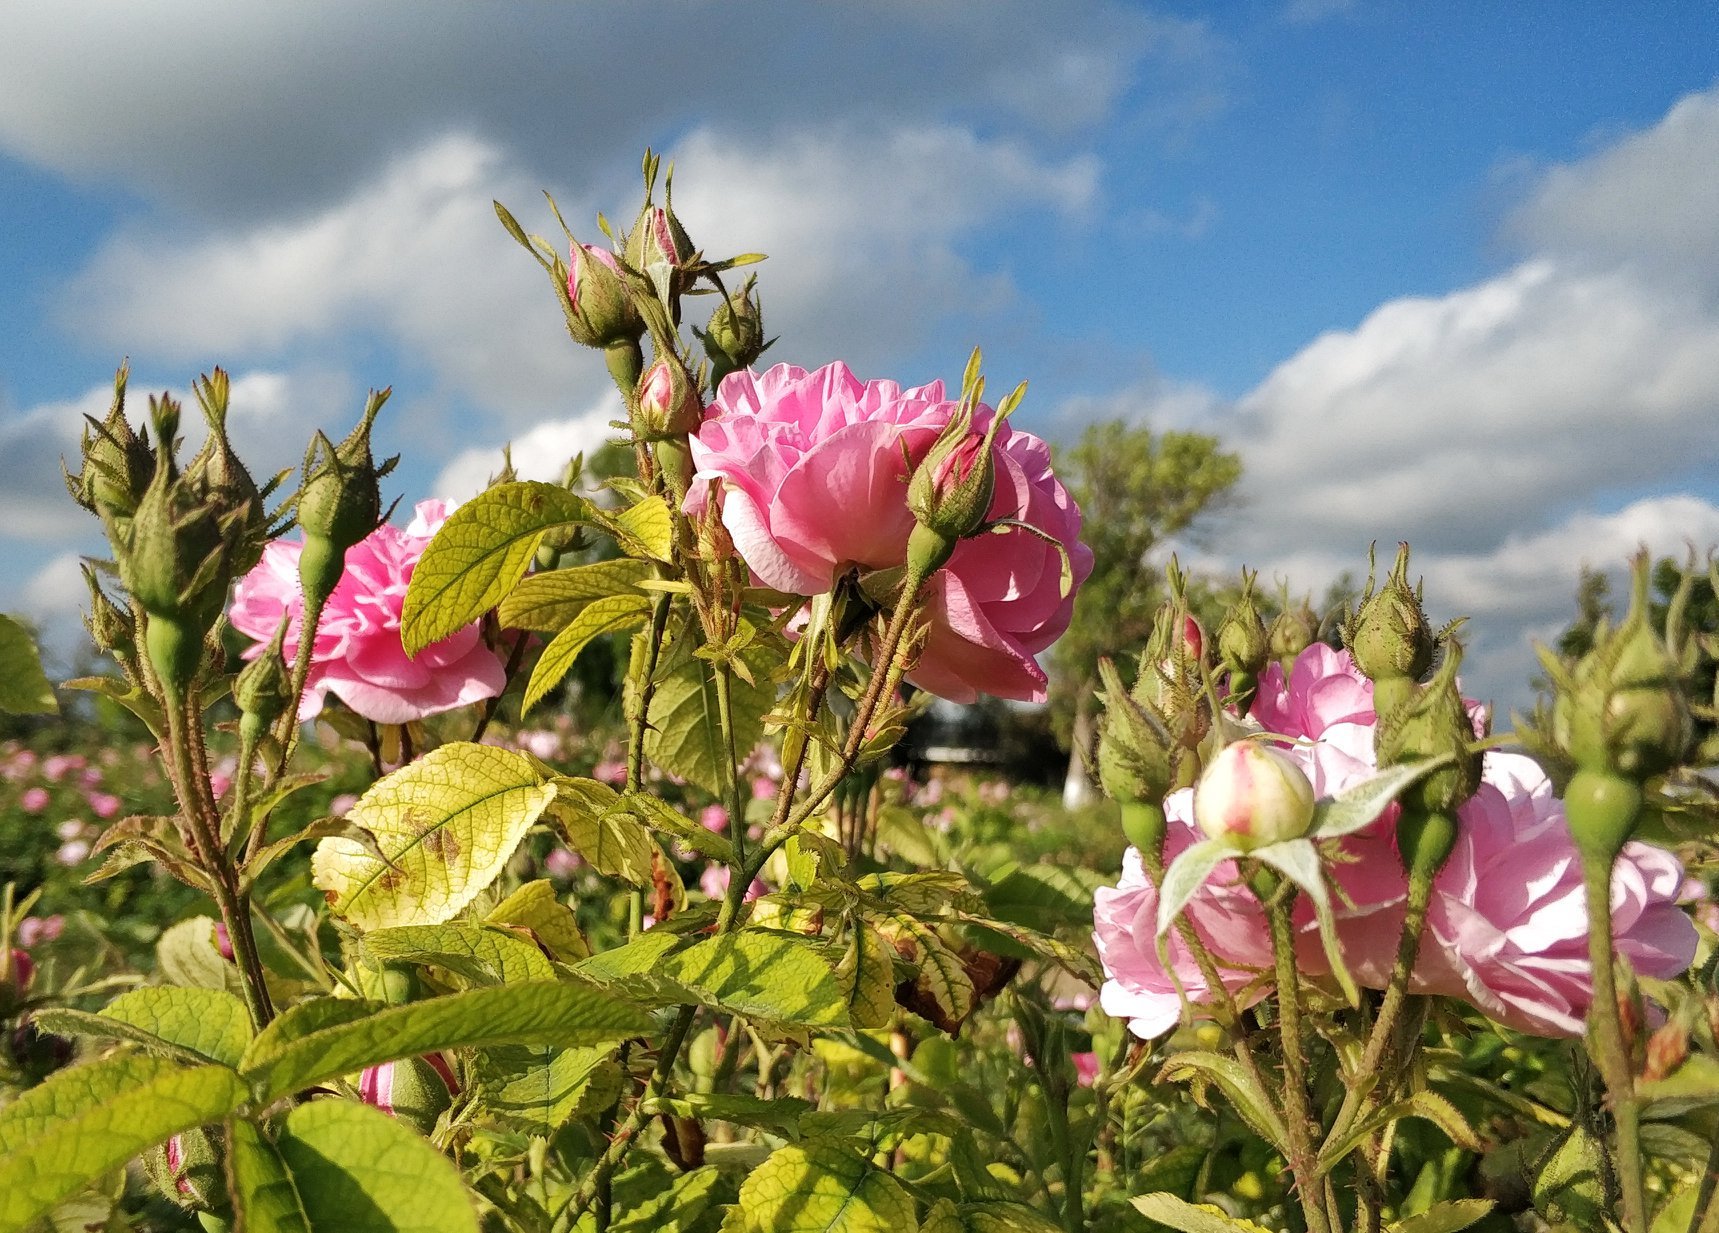 Breeding Roses: Secrets of Care and Propagation of this Popular Flowering Plant